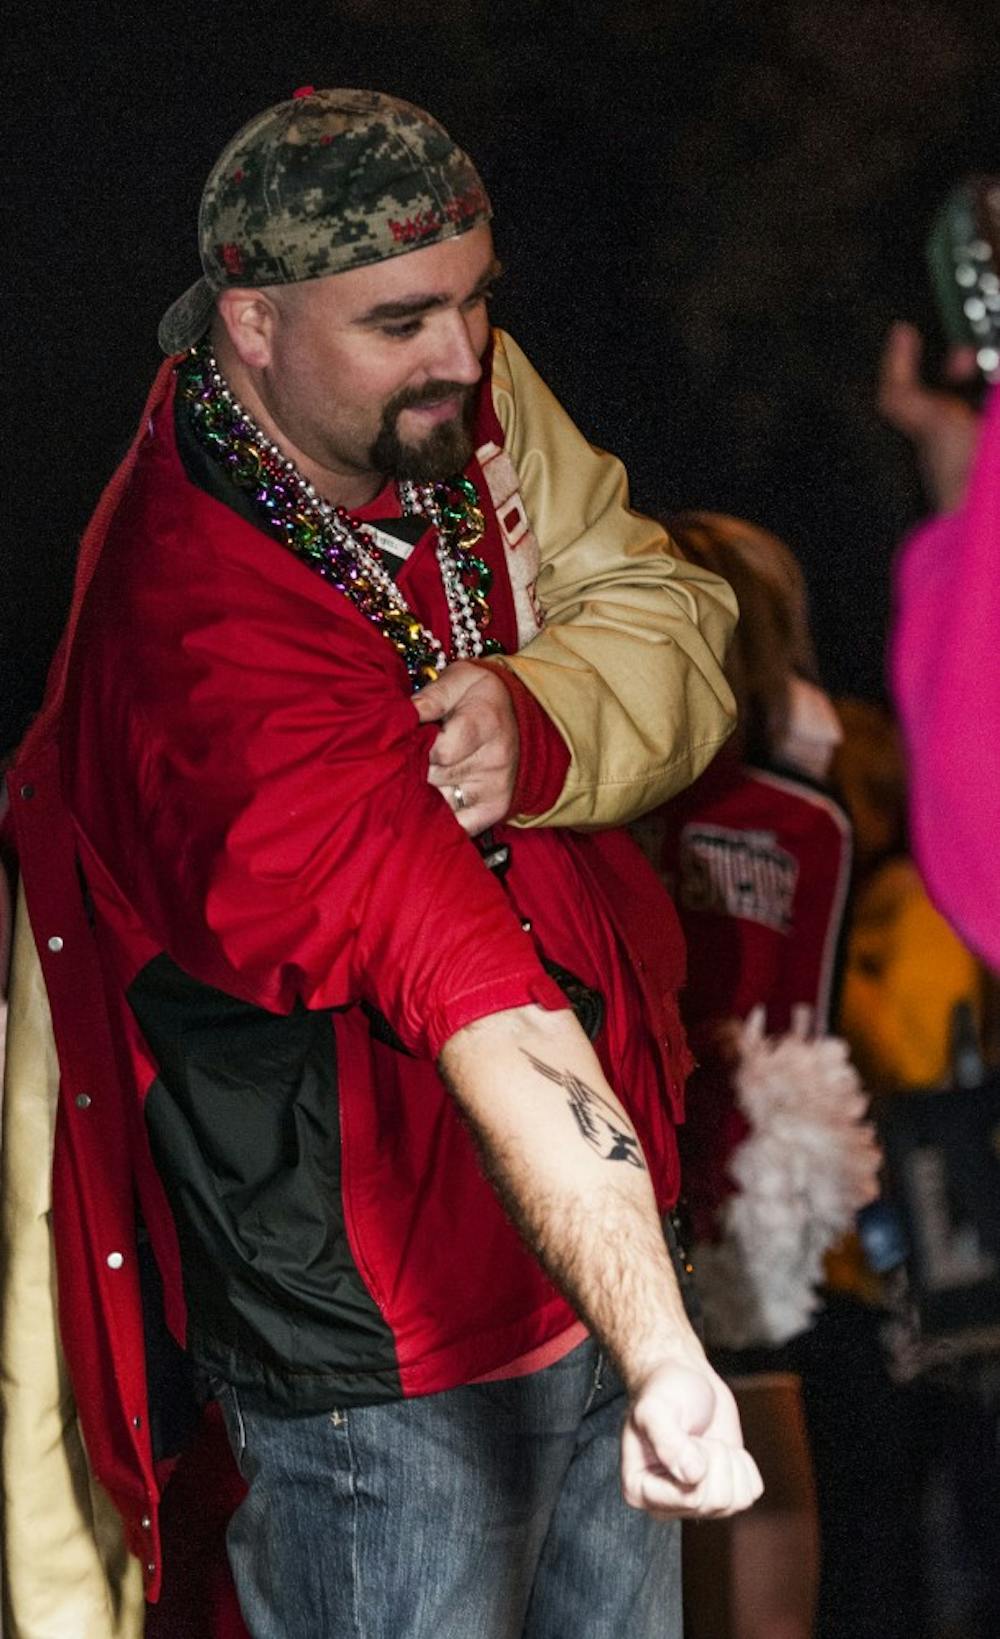 Bob Phelps shows off his tattoo to parade attendees during the pep rally on Jan. 4. Phelps recently fulfilled his college desire to get the tattoo. DN PHOTO JONATHAN MIKSANEK